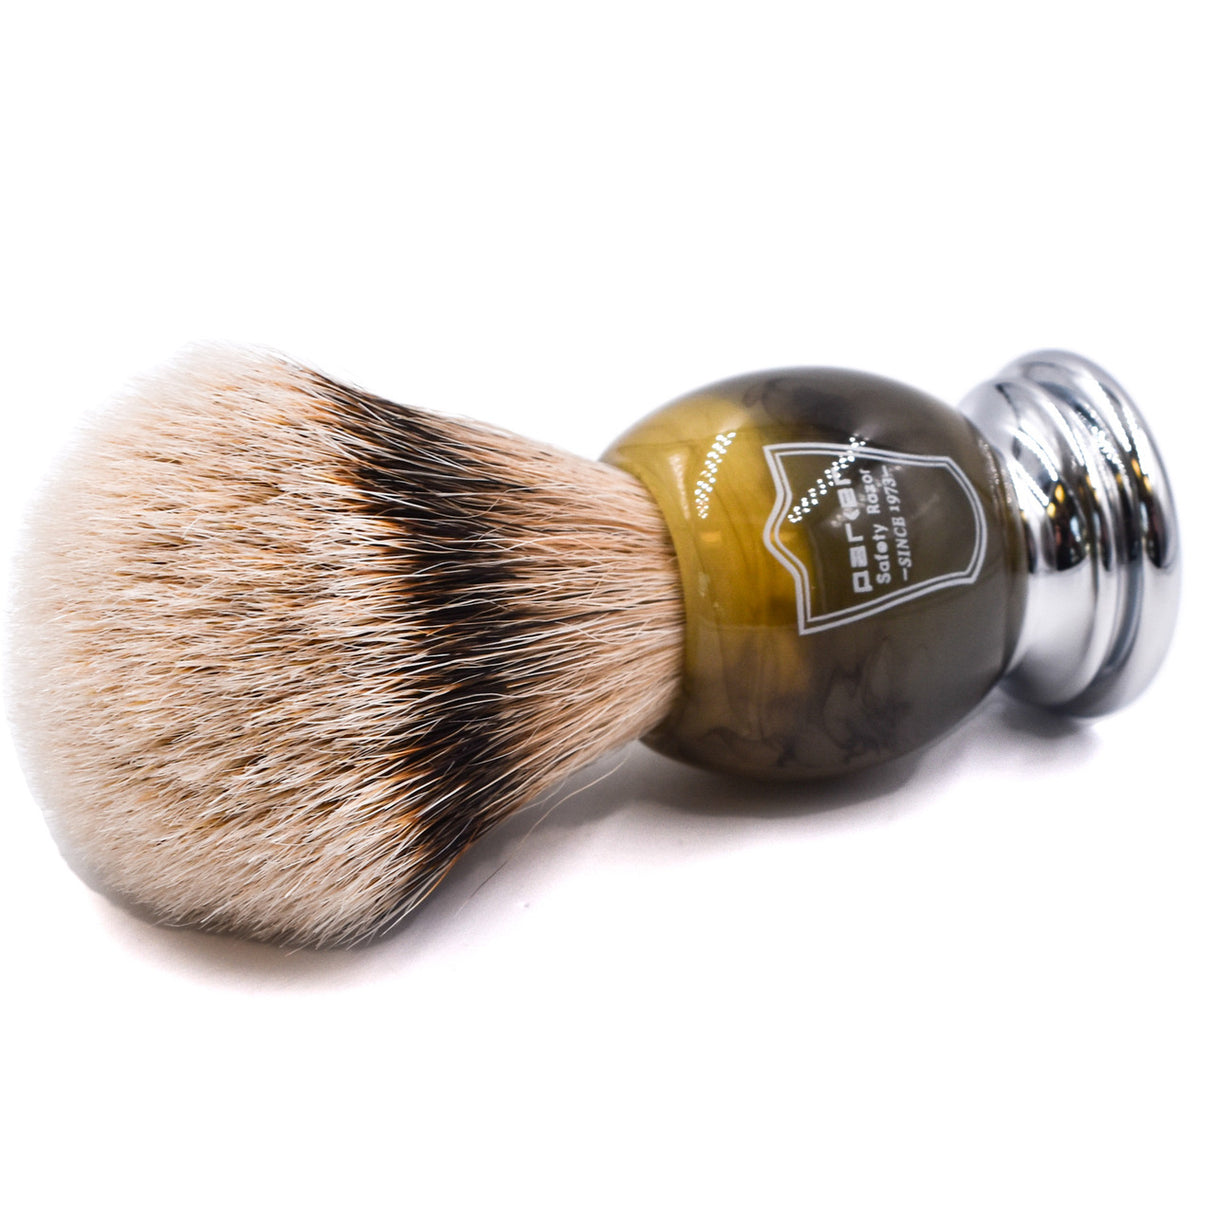 Parker - Faux Horn Handle Silvertip Badger Shaving Brush and Stand